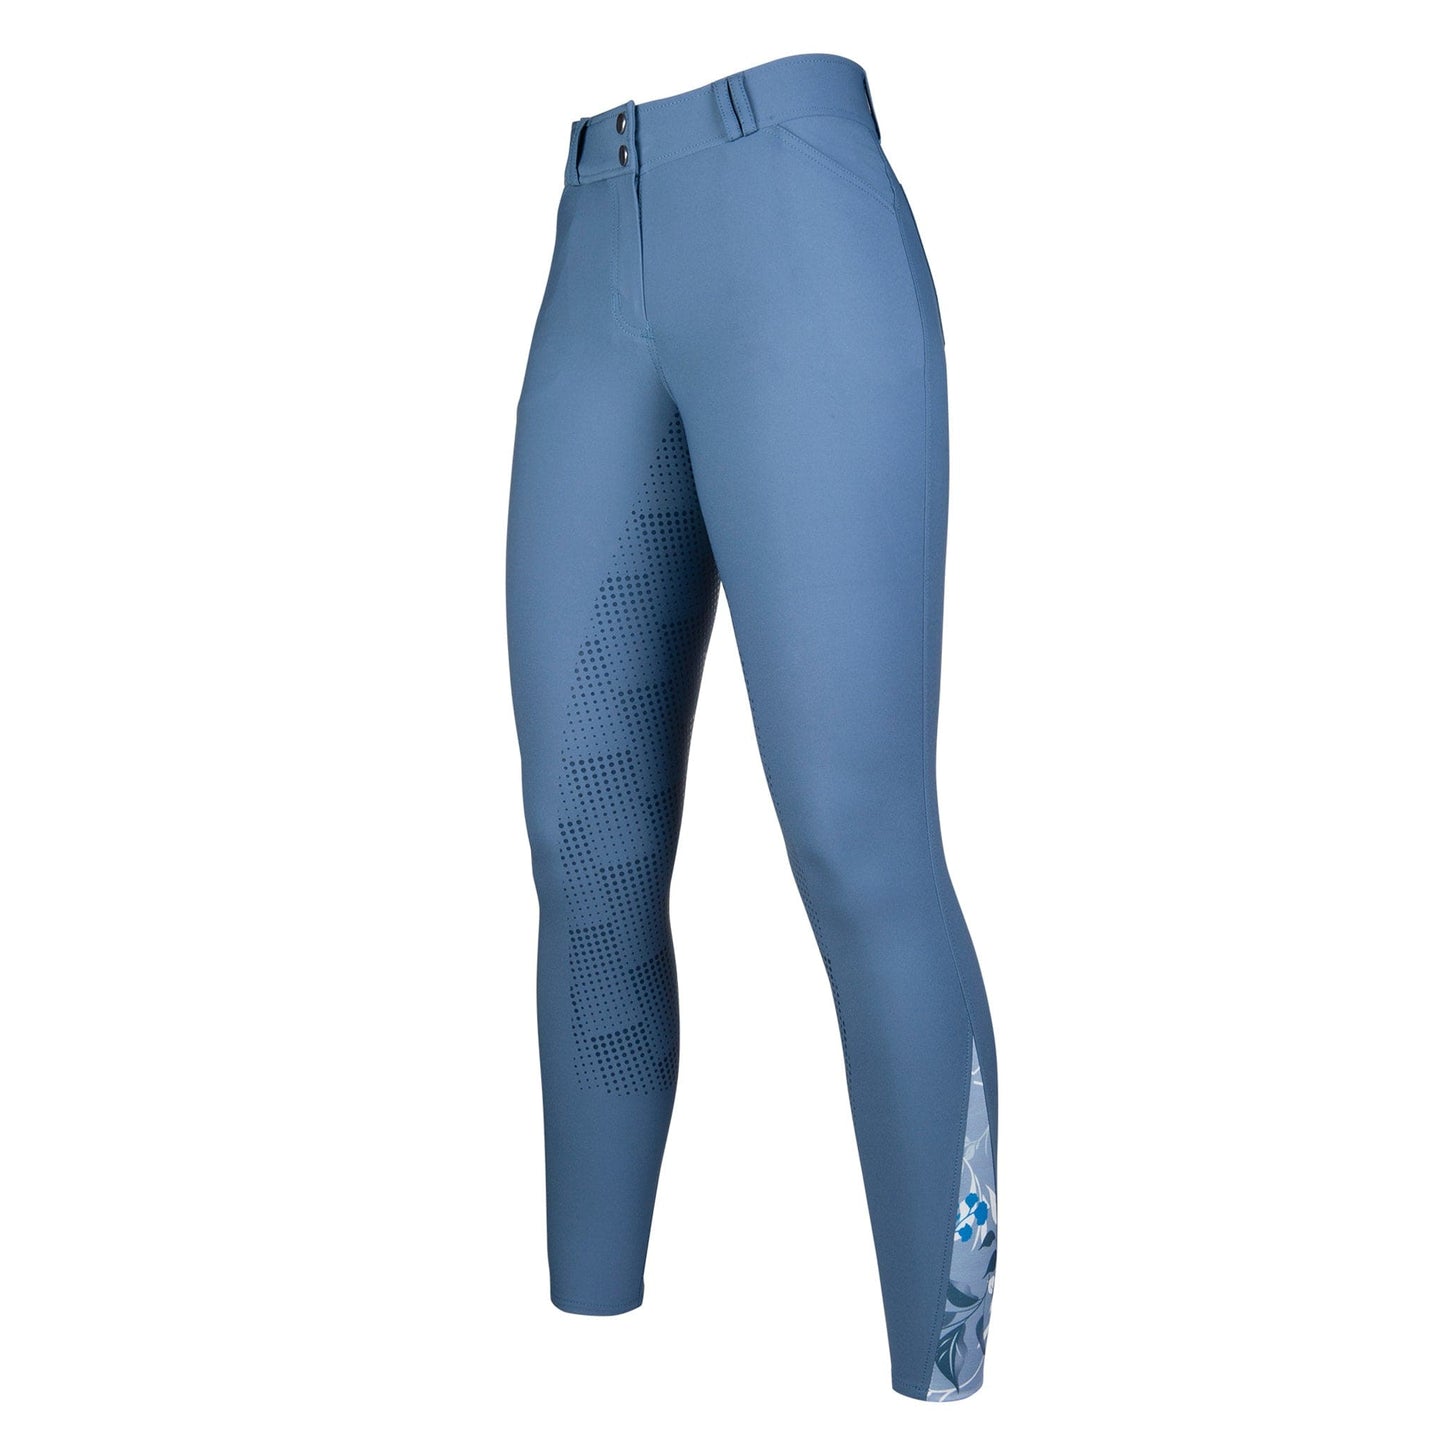 HKM Lauria Garrelli Sole Mio Silicone Full Seat Breeches 12380 Middle Blue Front Left View